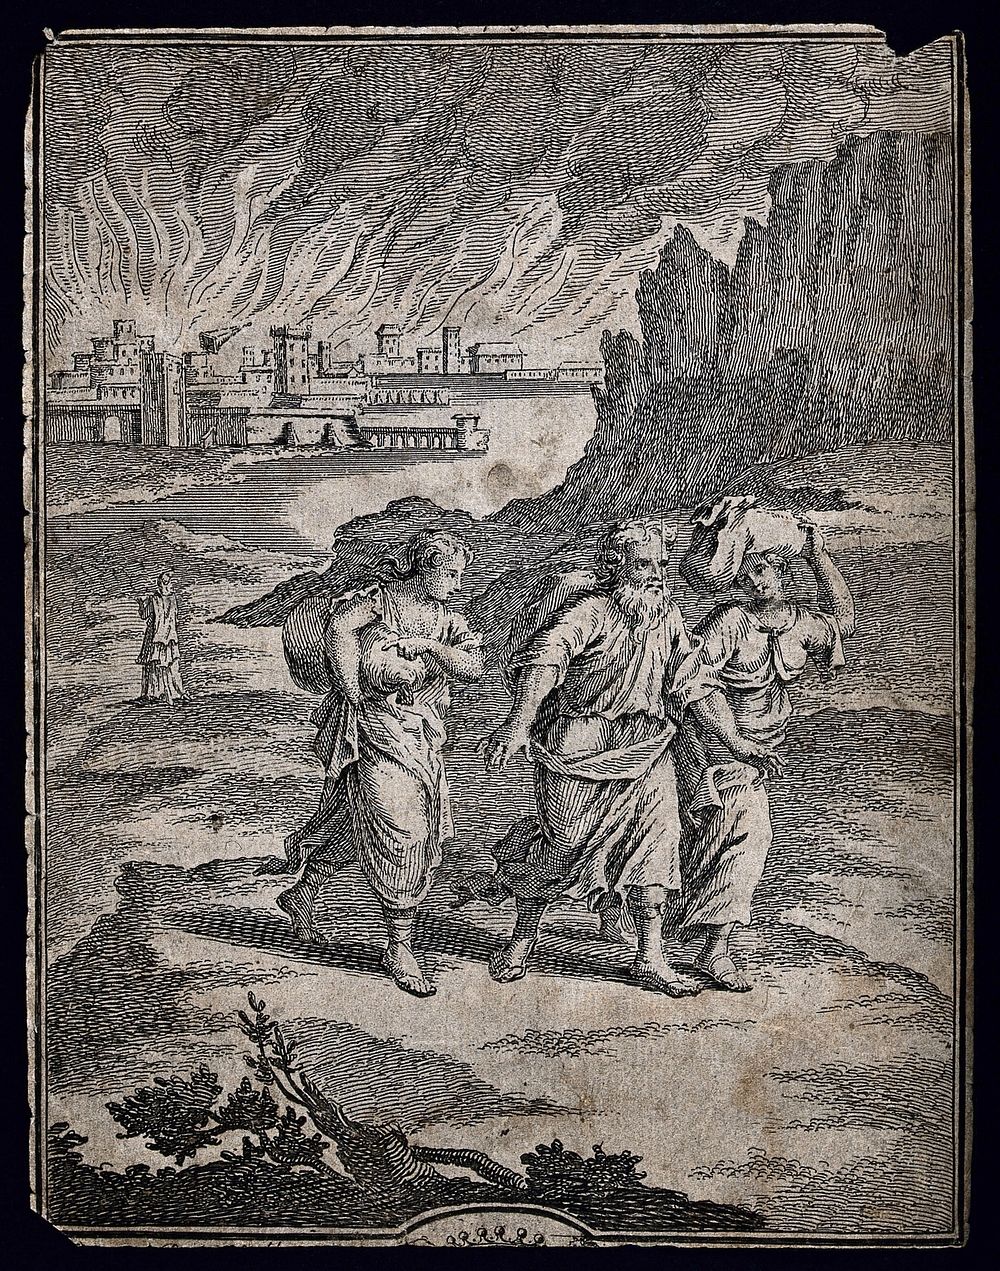 Lot and his daughters leave Sodom as it burns; Lot's wife stays behind to look at it. Etching.